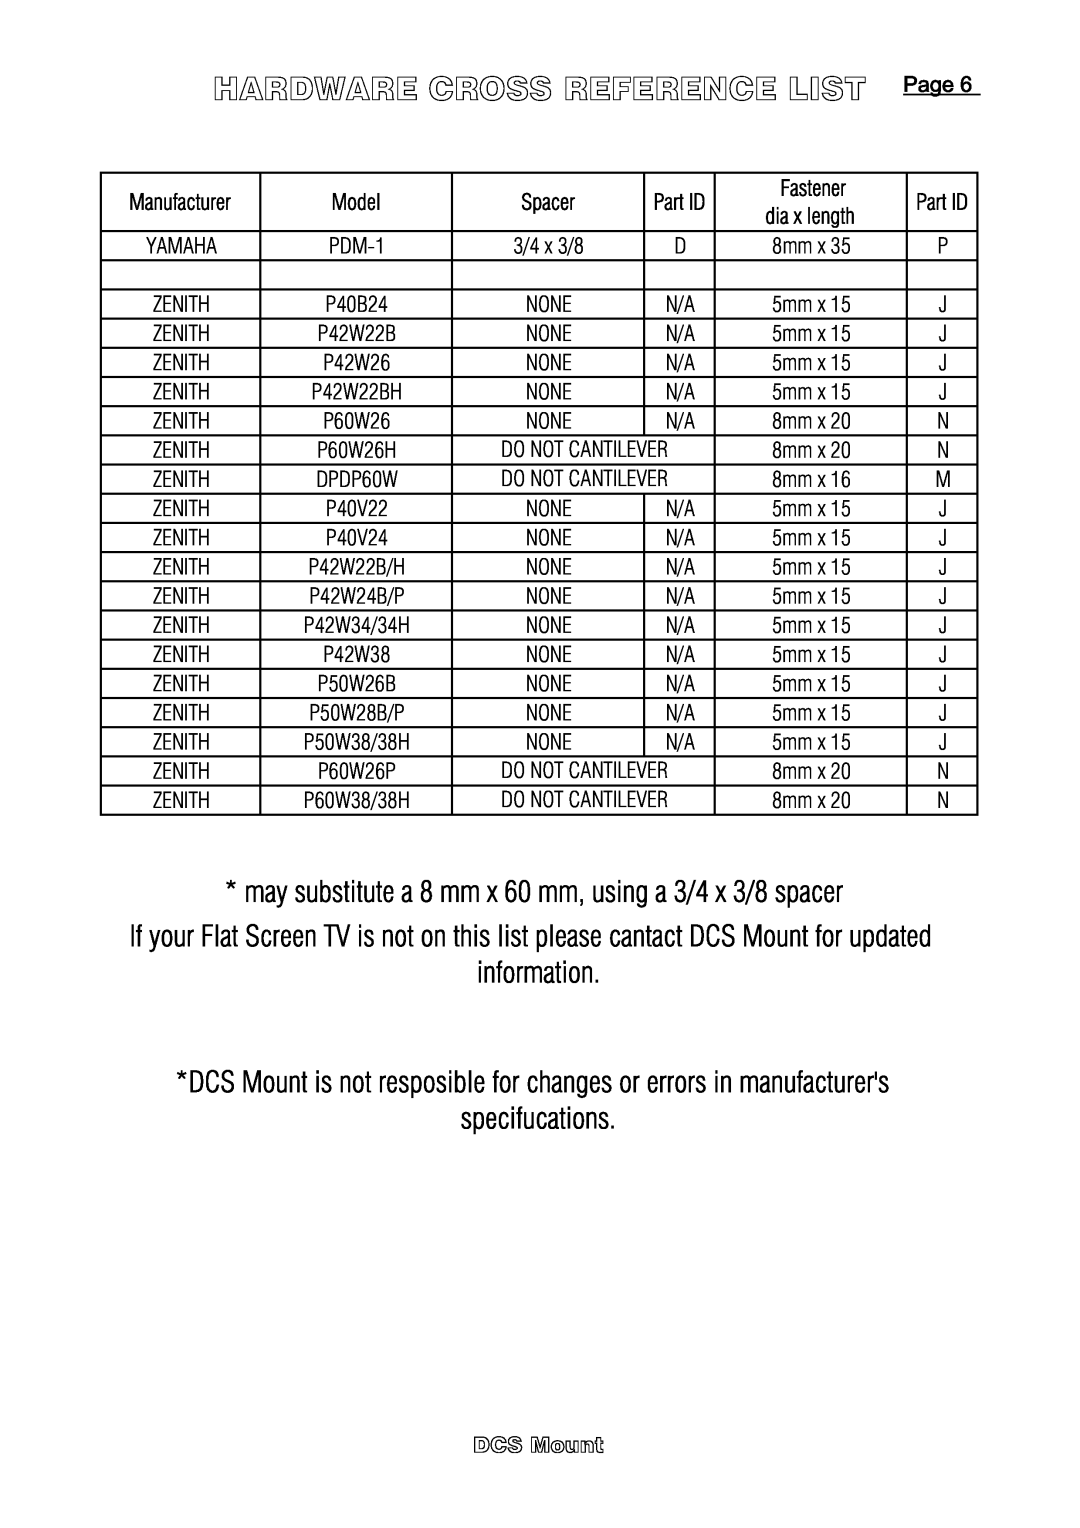 DCS Flat Panel TV Hardware Cross Reference List, may substitute a 8 mm x 60 mm, using a 3/4 x 3/8 spacer, information 